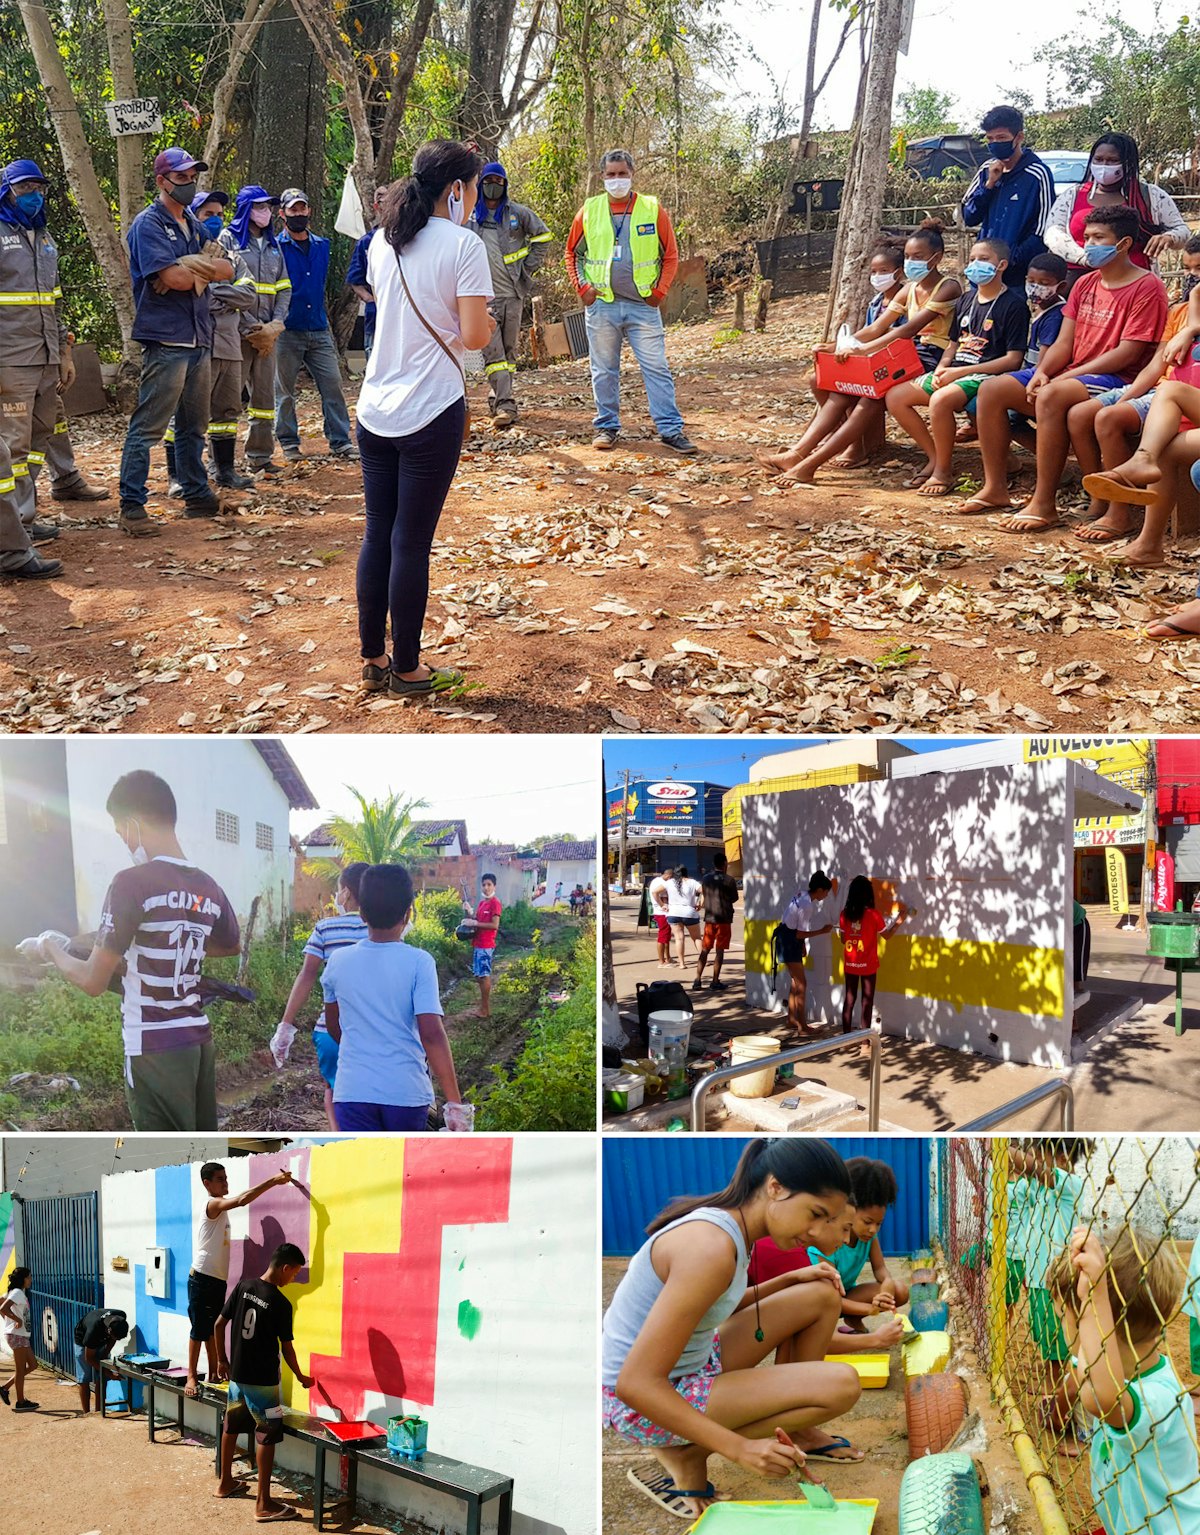 In Brazil, a group of youth participating in Bahá’í community-building efforts drew on government support to remove 12 tons of trash from the area around a local river.